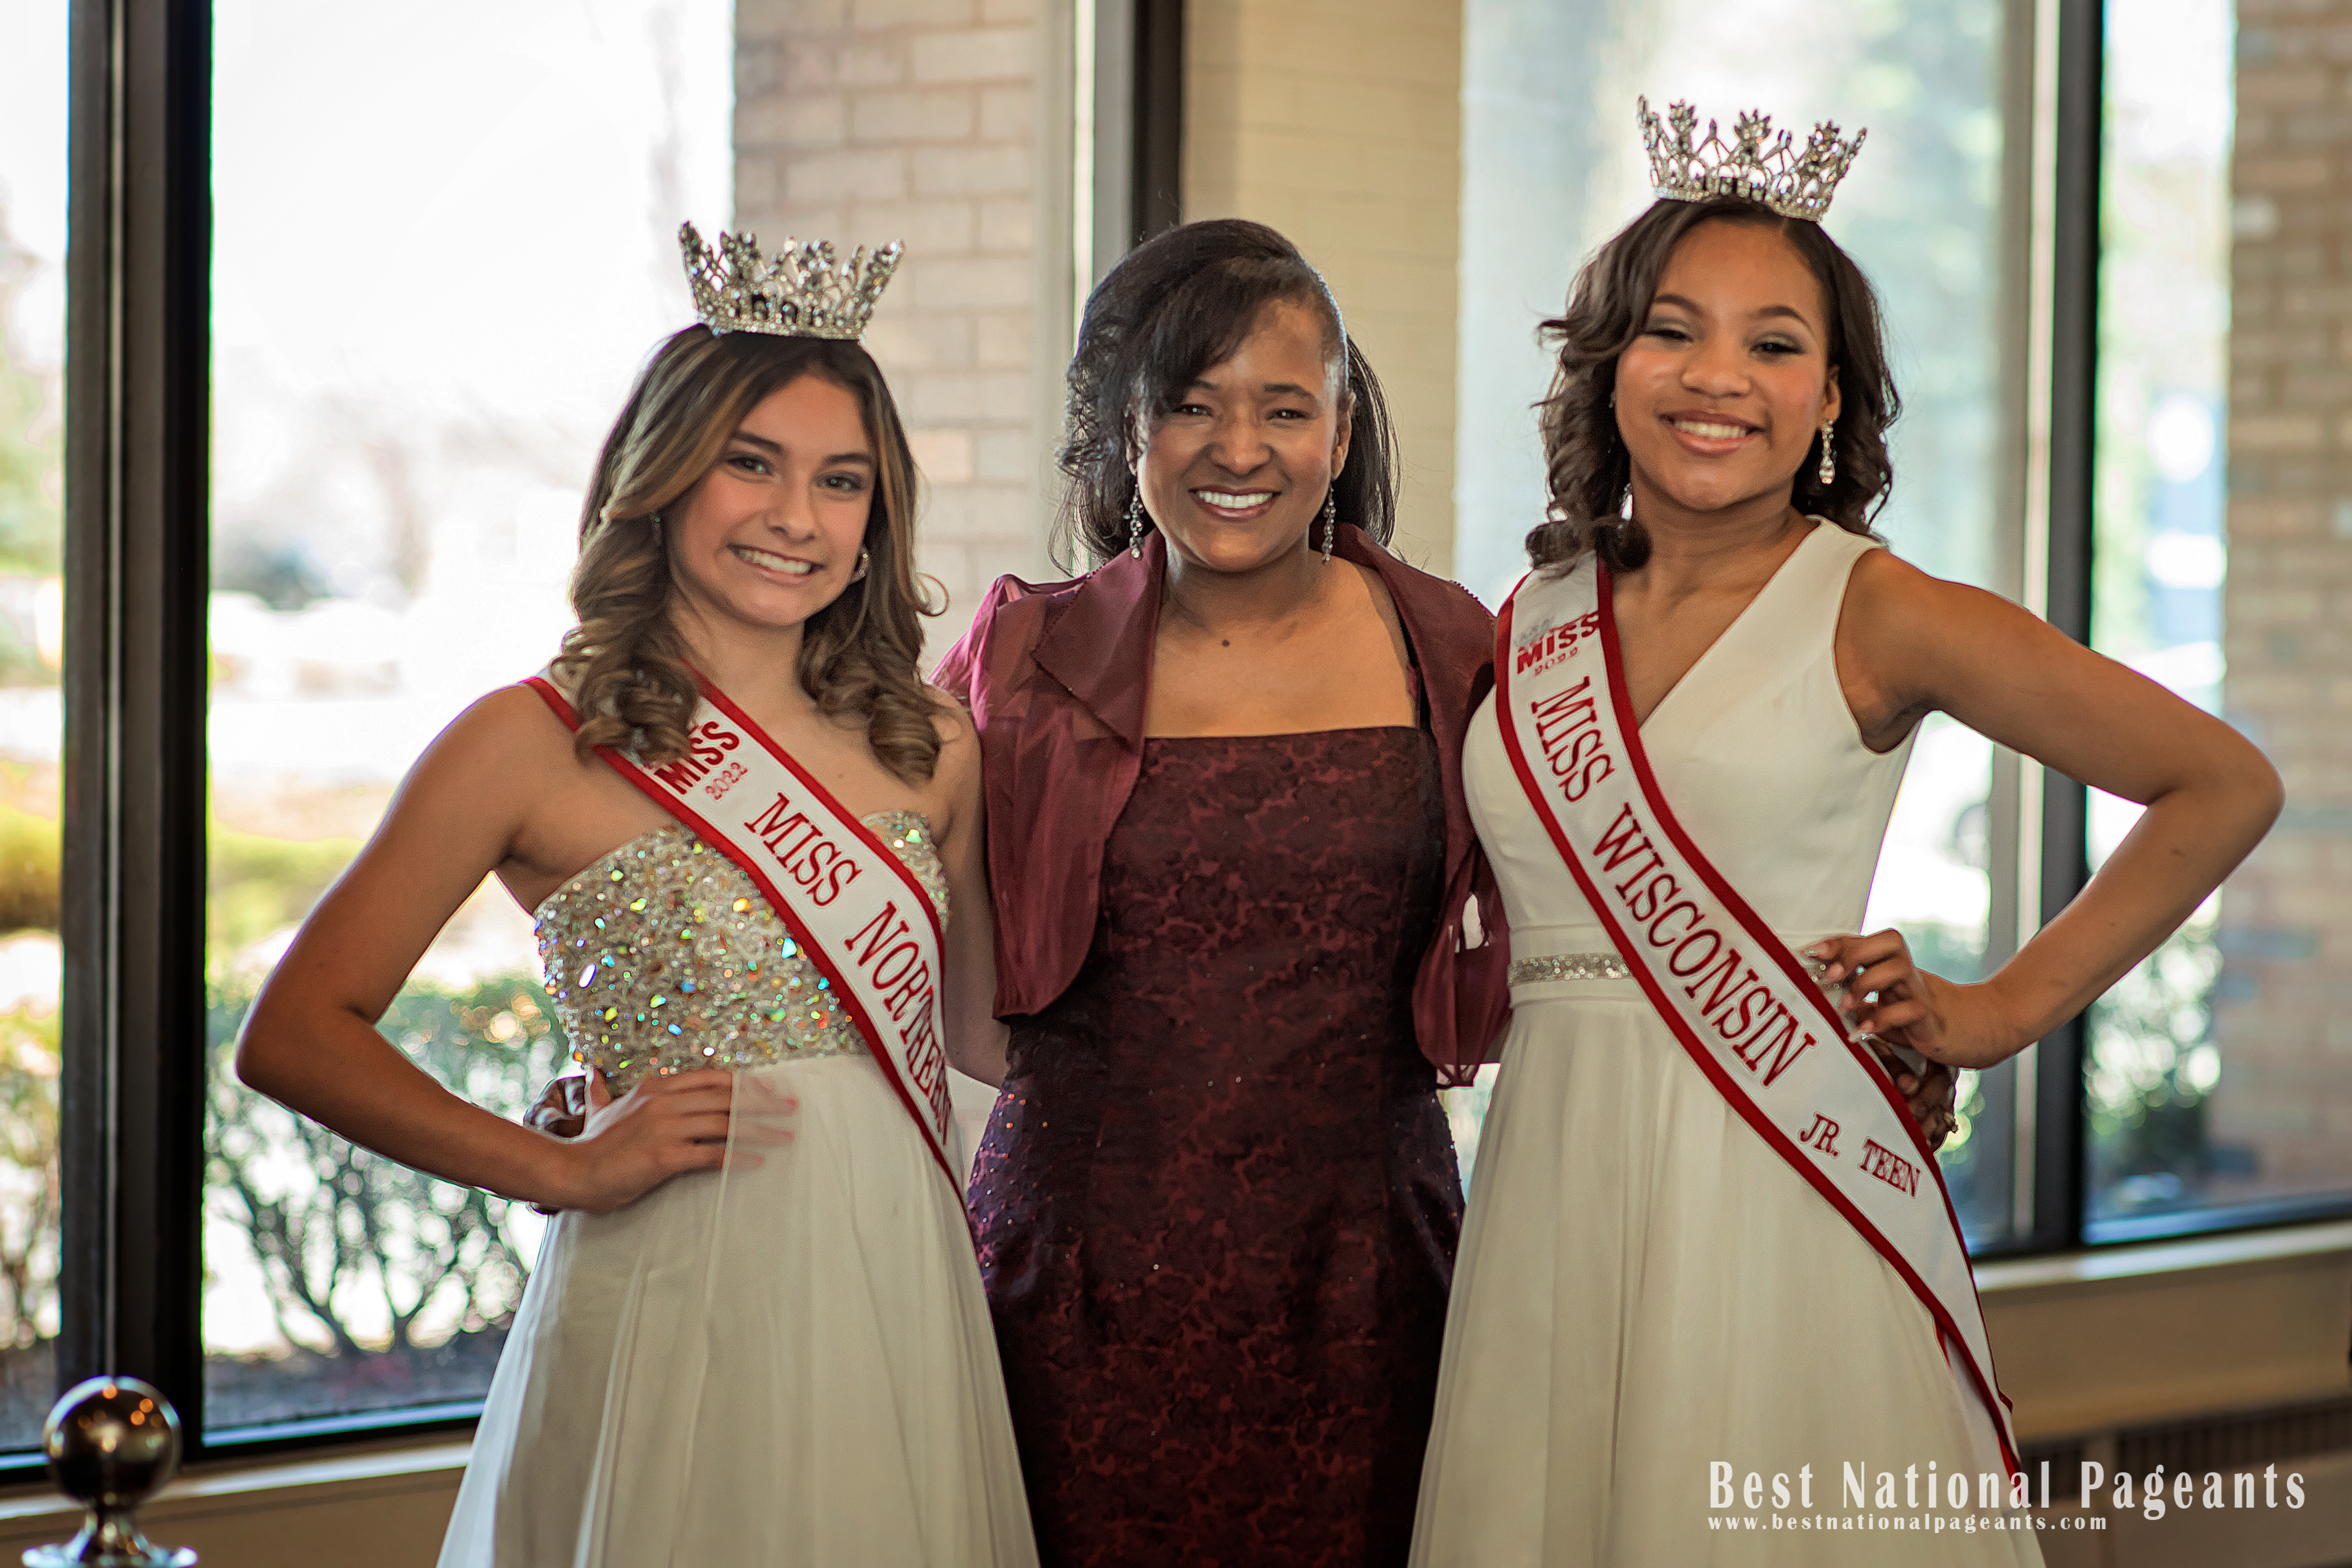 Best National Pageants Contestants